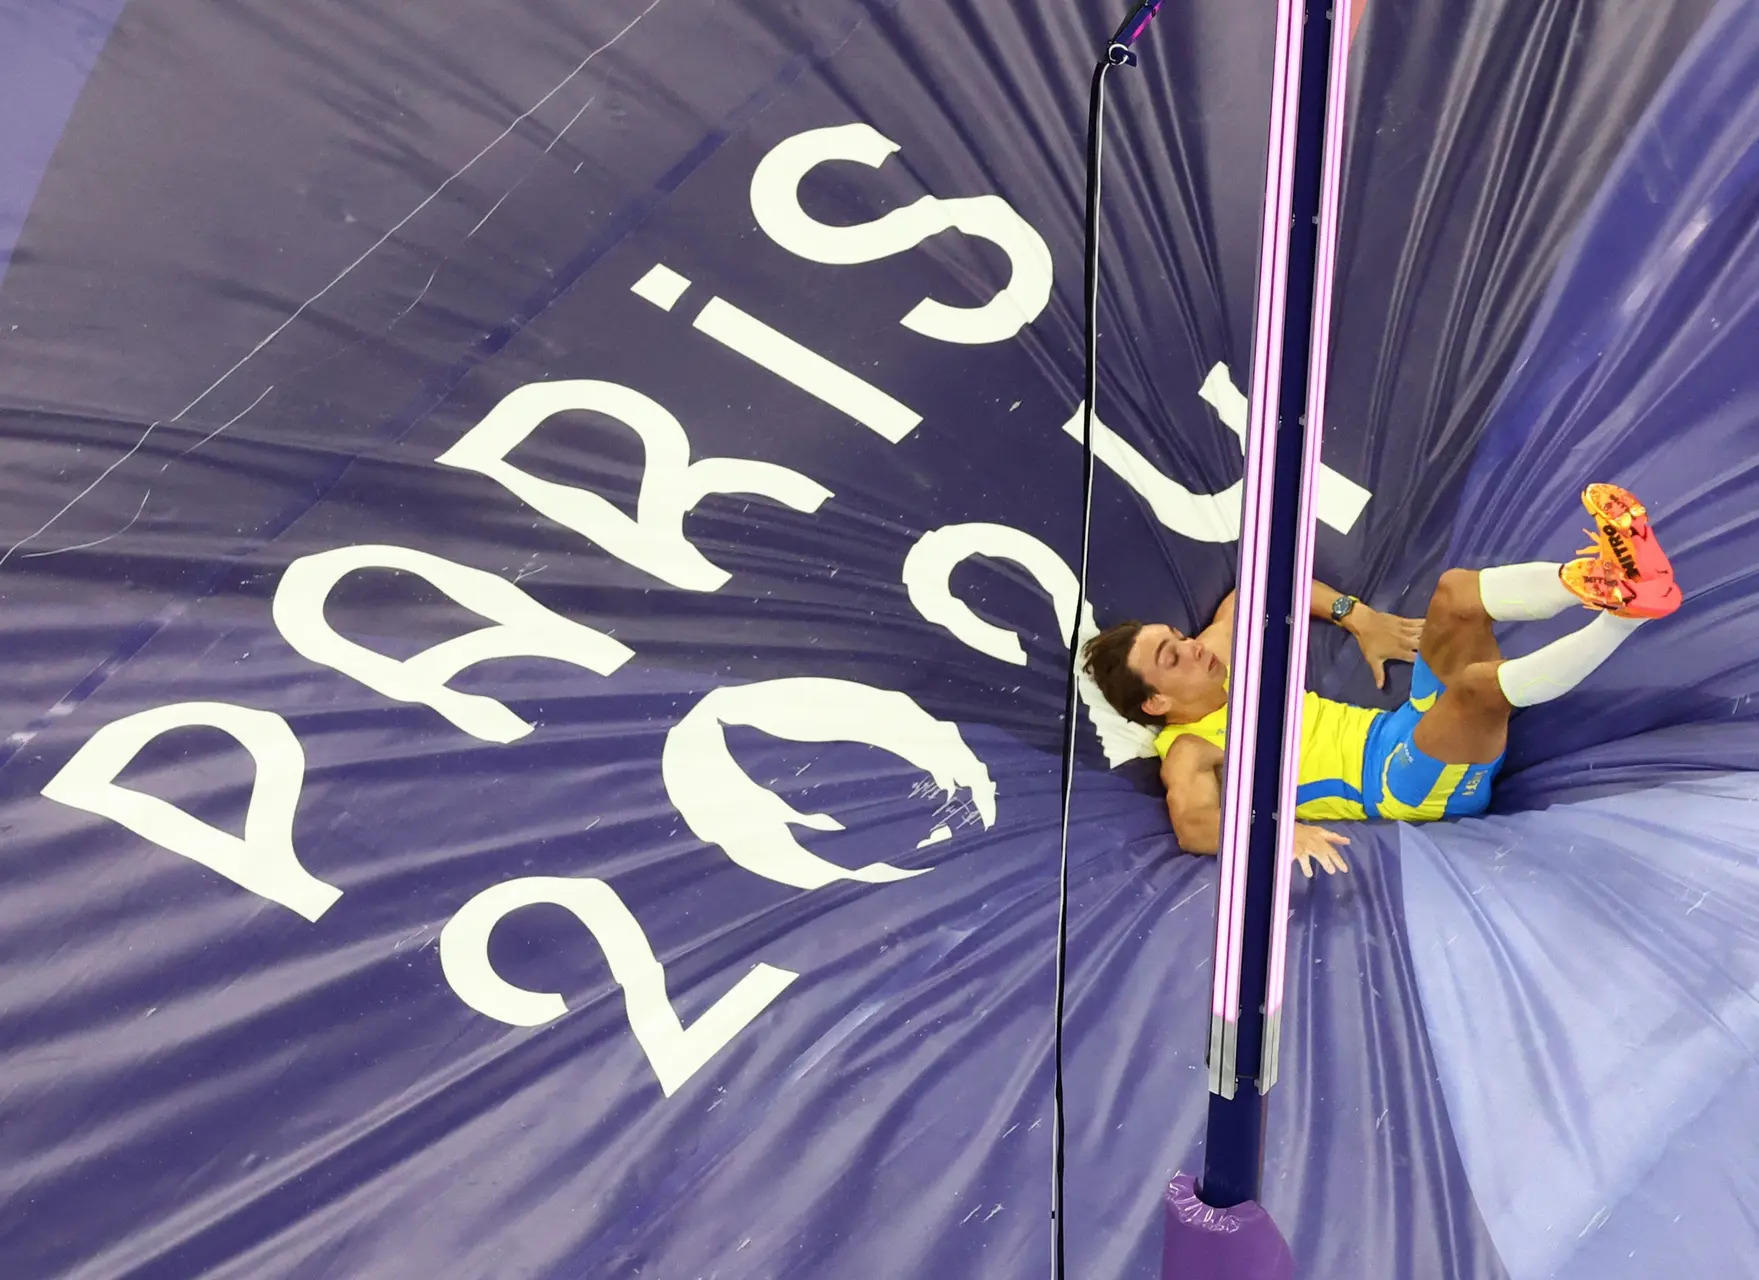 Pole vault video at Paris Olympics 2024 goes massively viral for bizarre reasons, here's all you need to know 